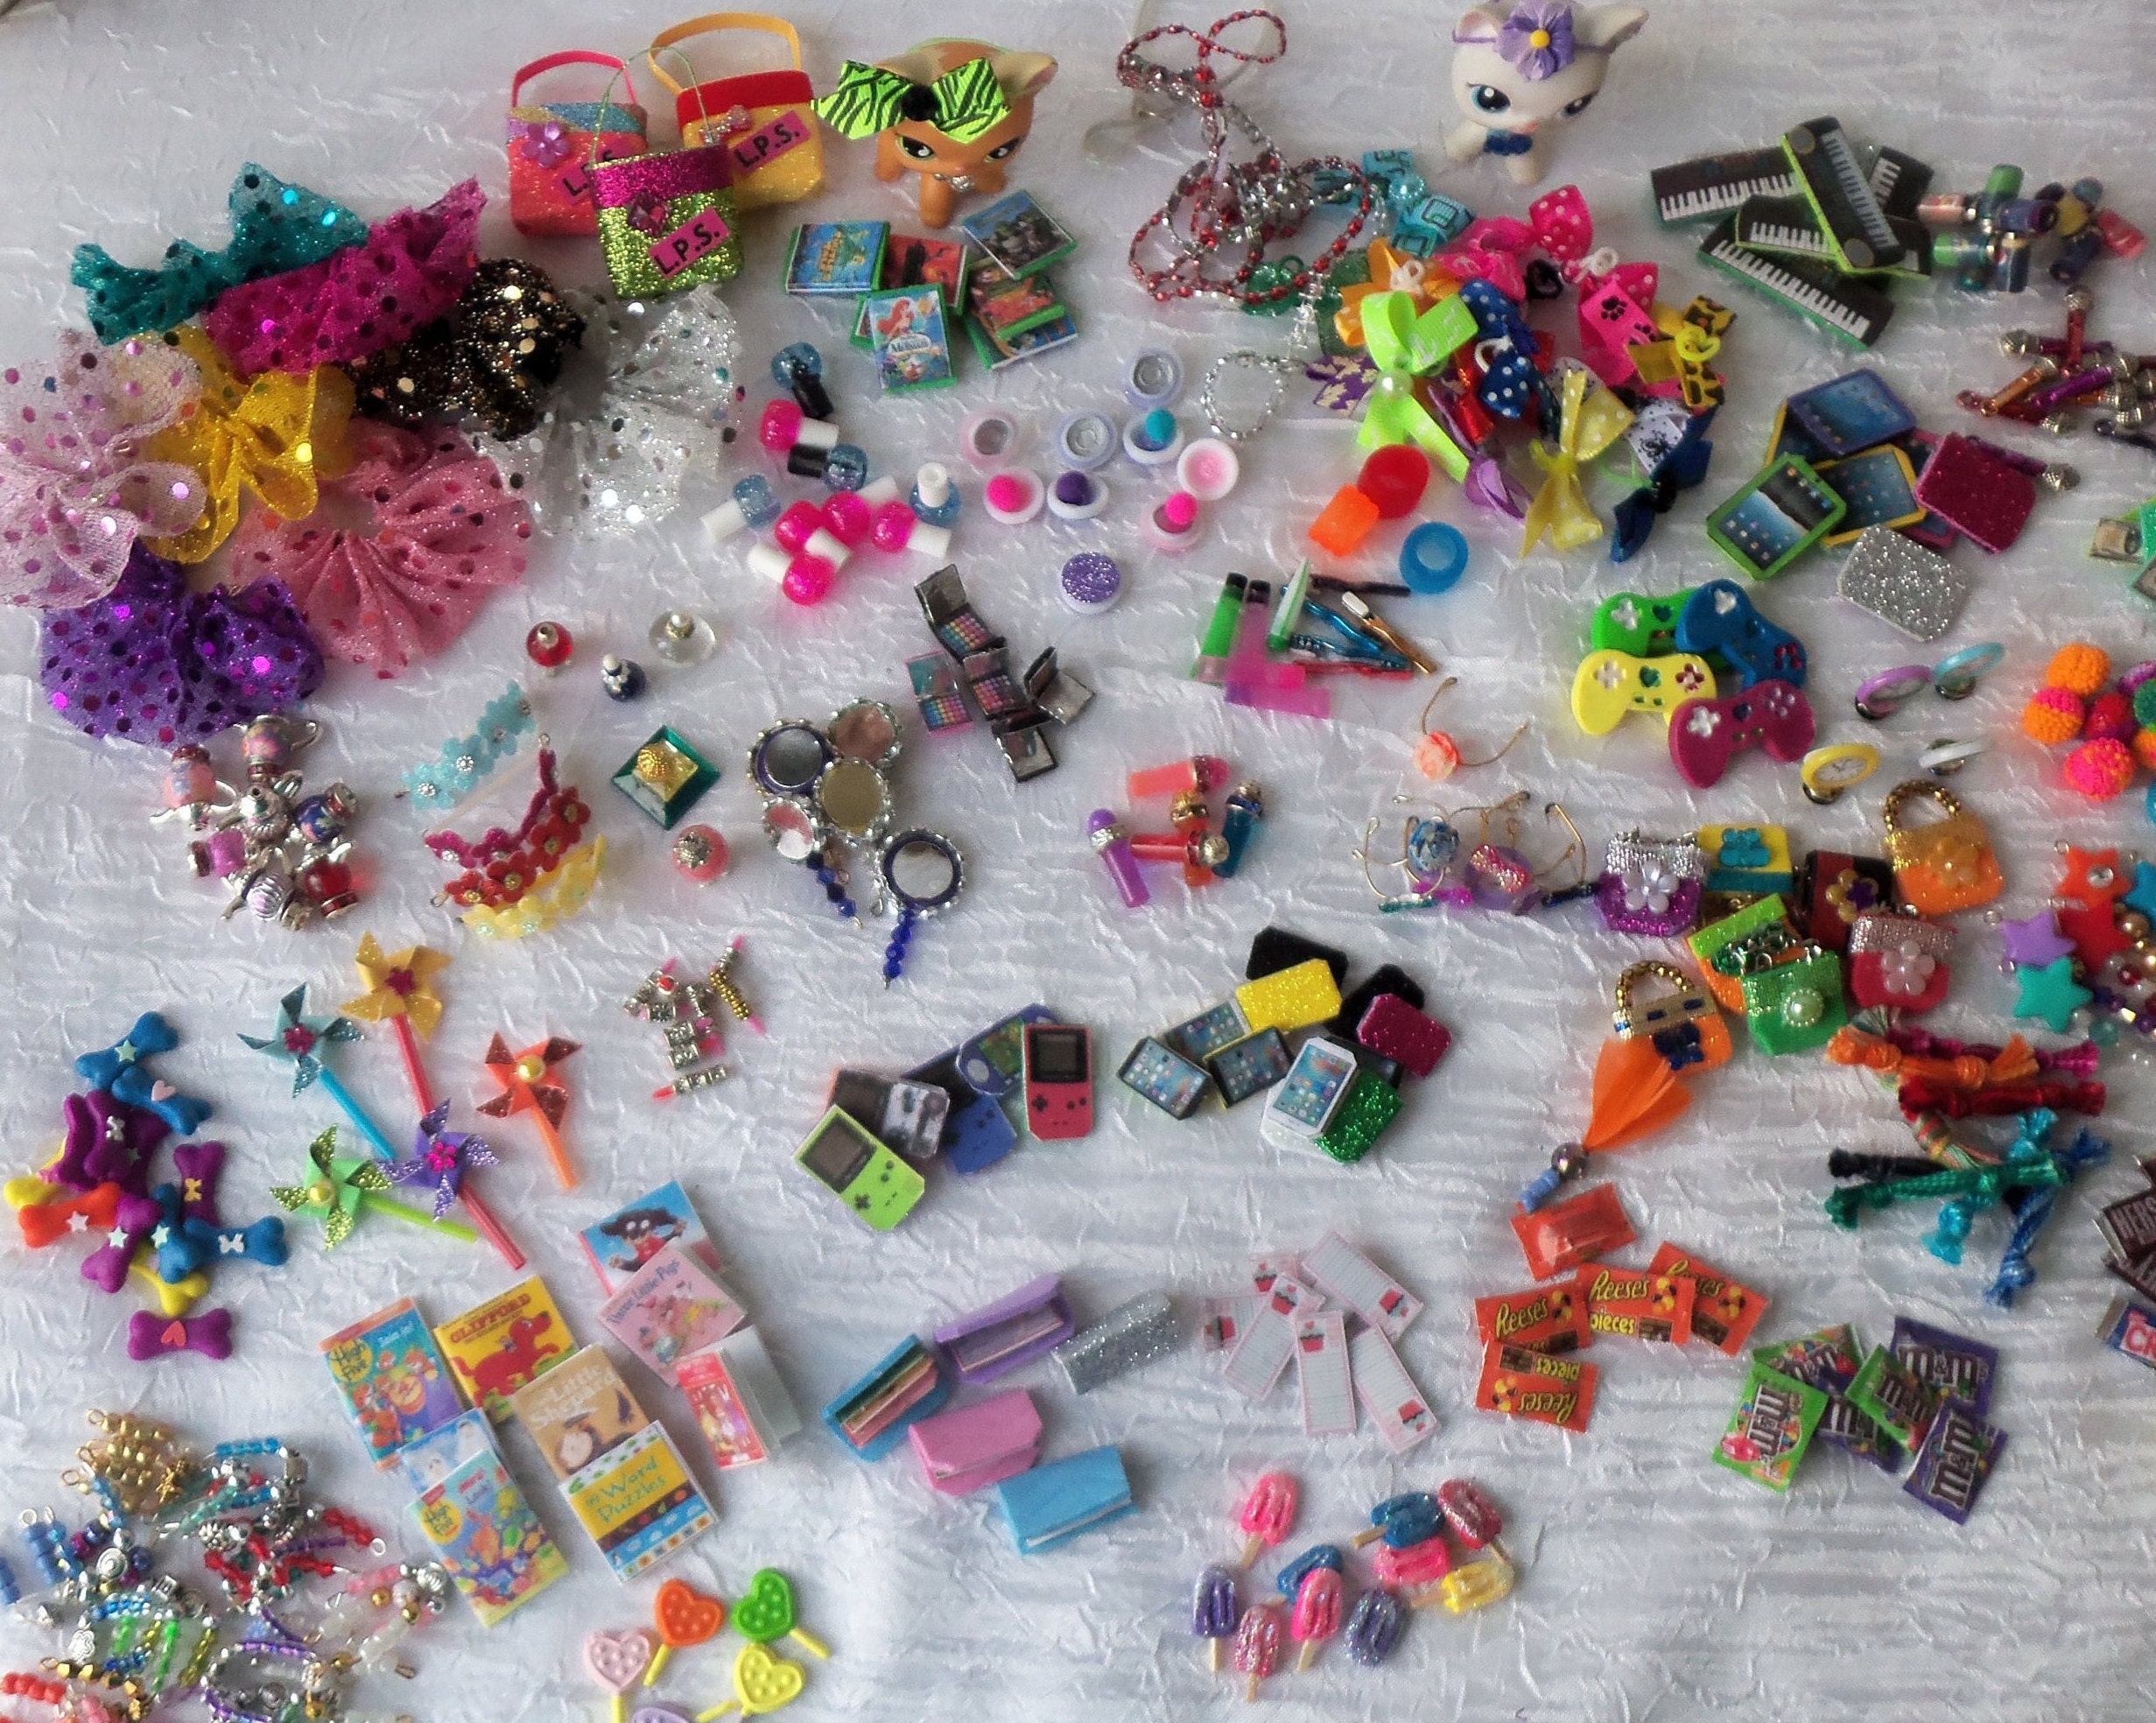 8 Lot Accessories For LPS Shawl Bone Cola Computer Great Gifts For Kid Rare 